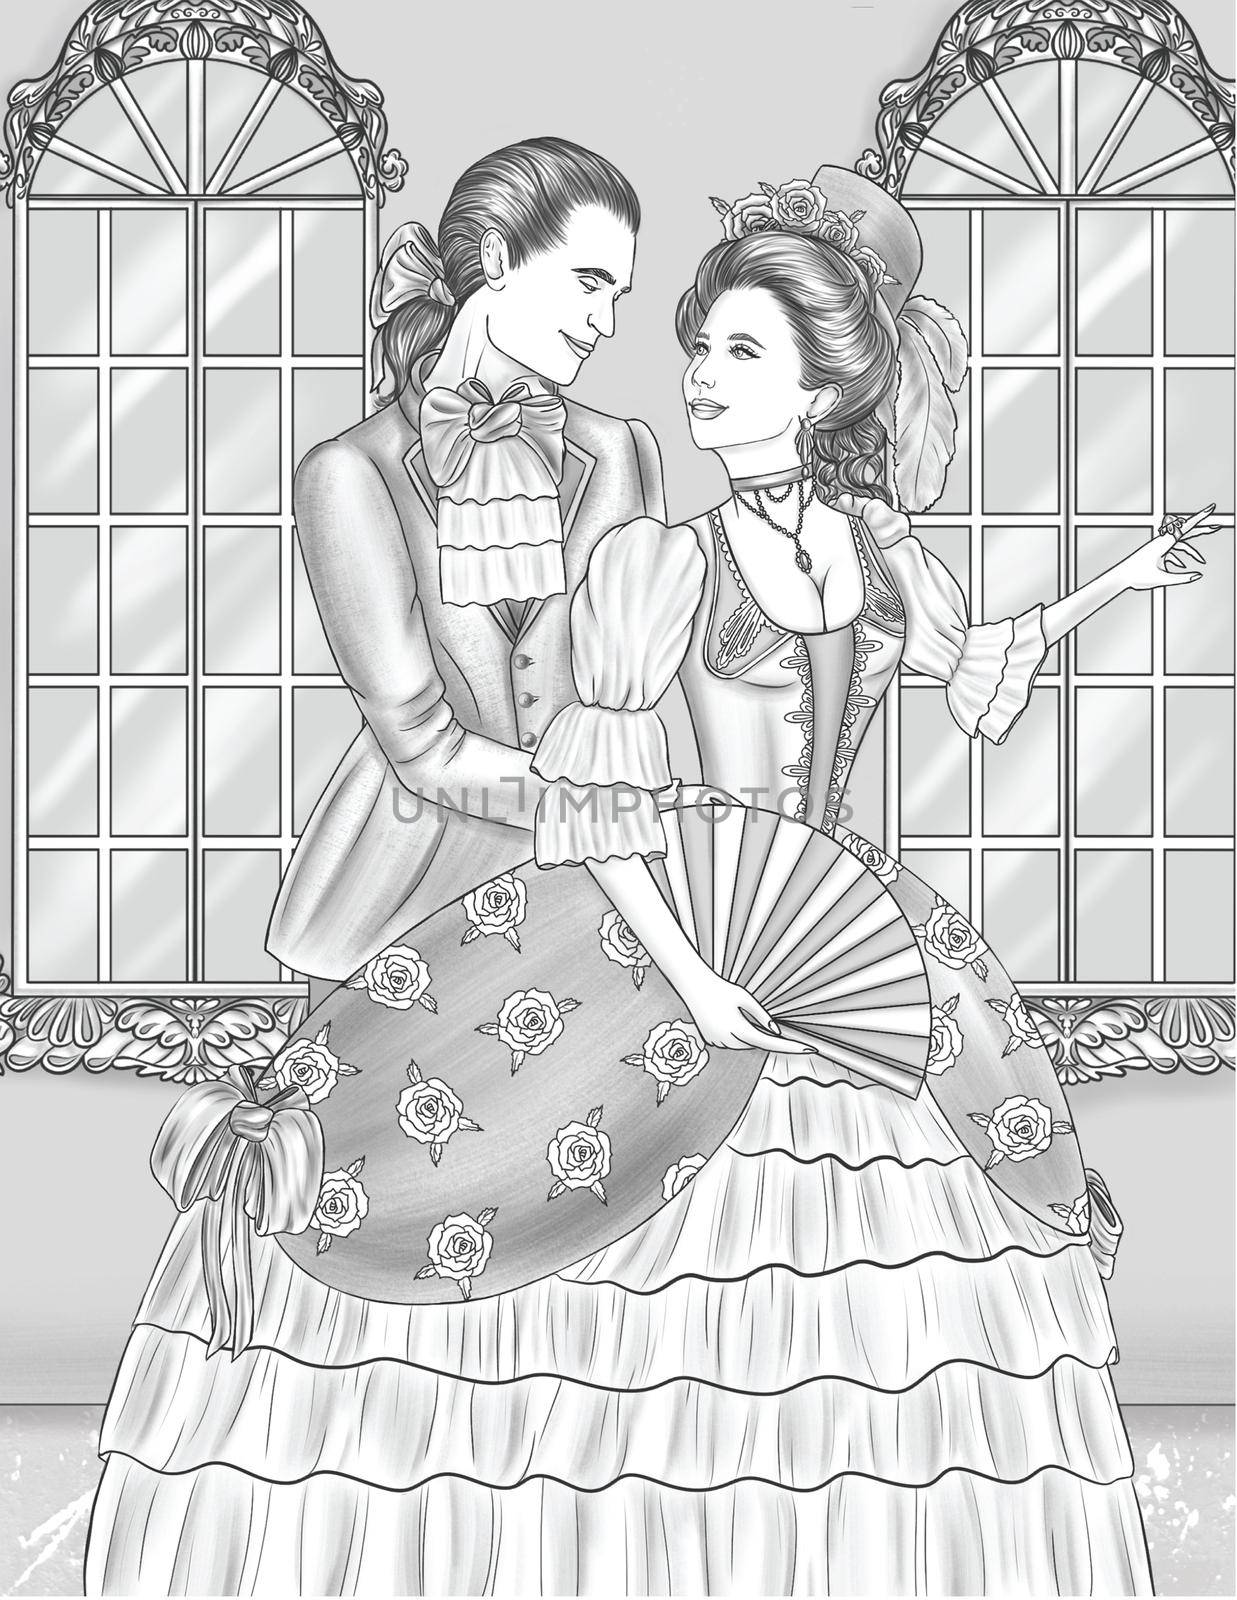 Man And Woman In Vintage Attire Standing Looking At Each Other With Windows Colorless Line Drawing. Lady In Dress Holding Fan Looking At Gentleman In Suit Coloring Book Page. by nialowwa